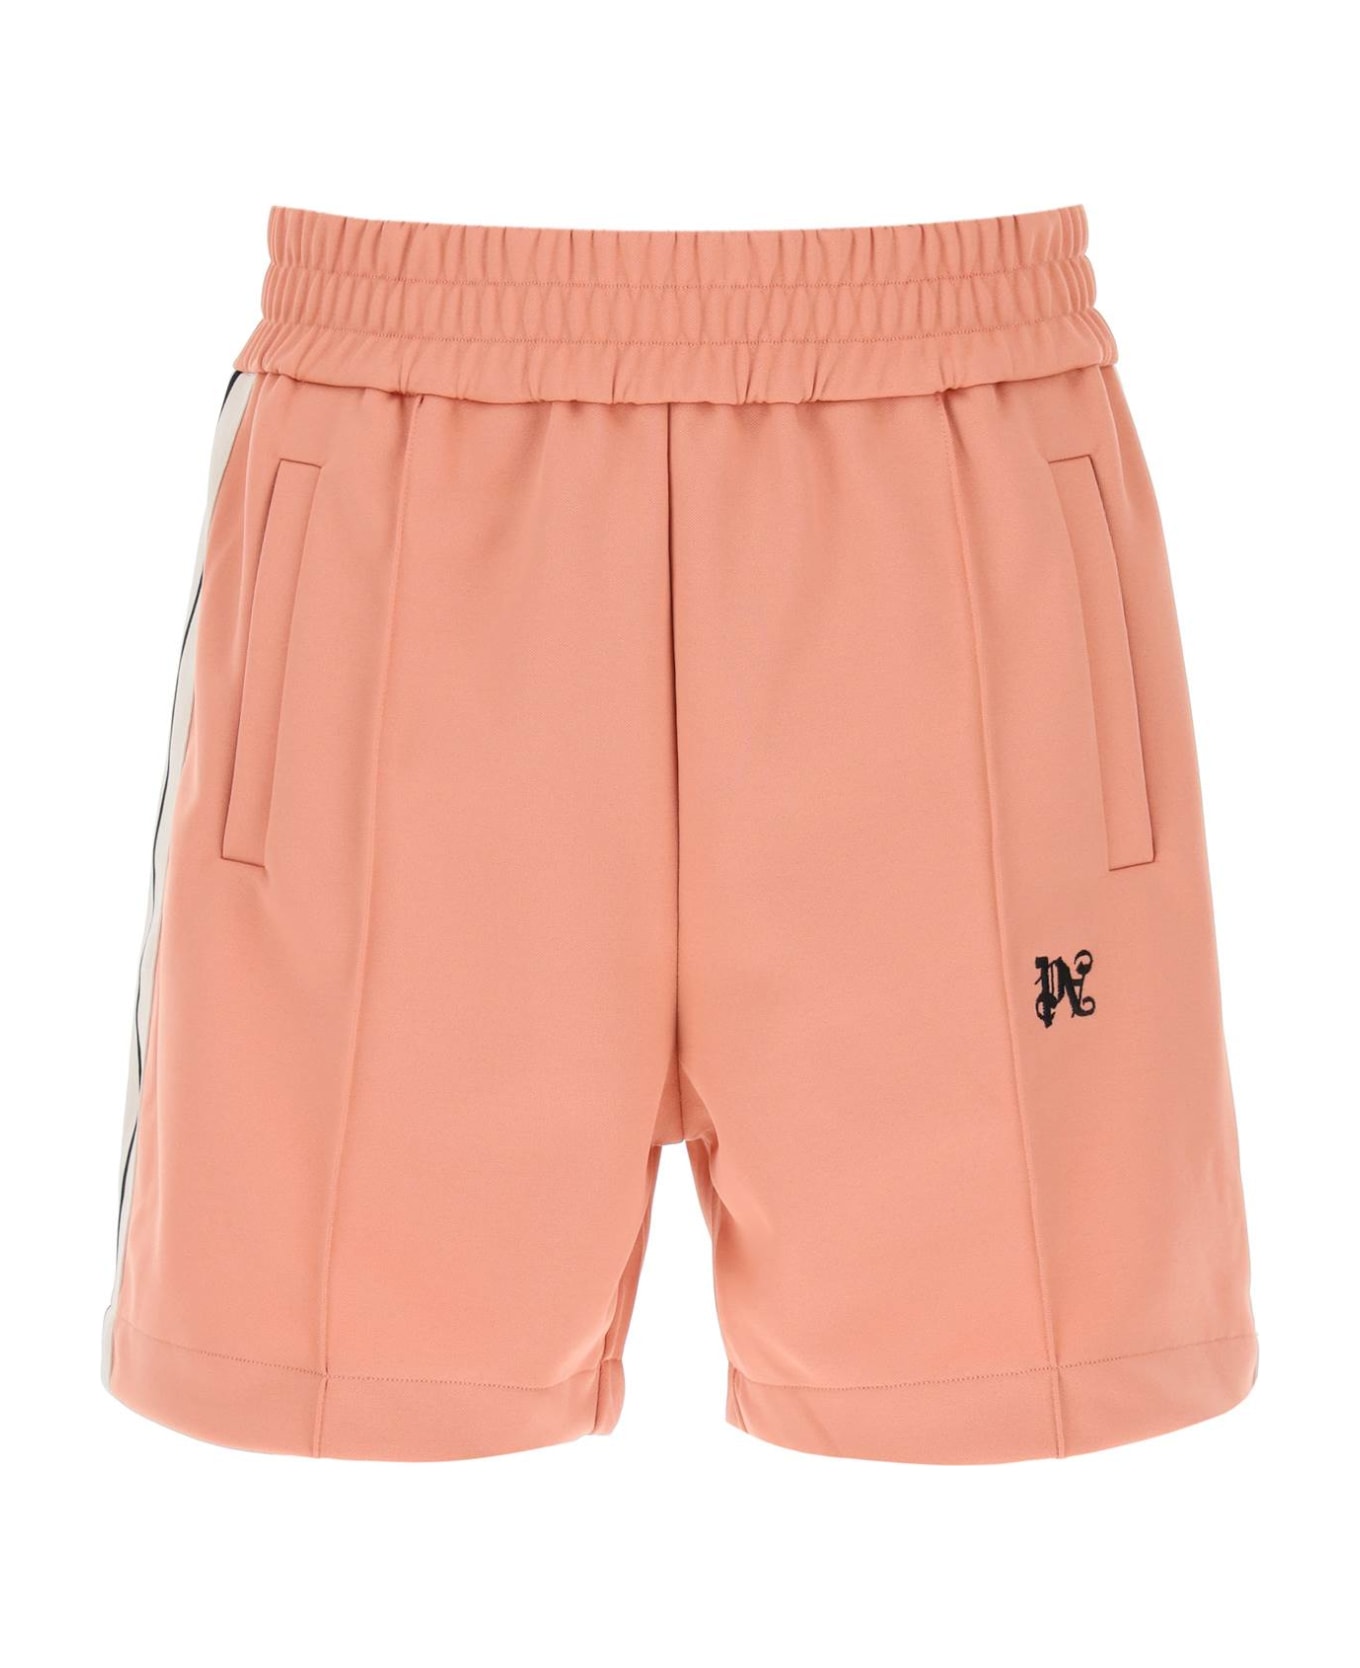 Palm Angels Sweatshorts With Side Bands - PINK BLACK (Pink)